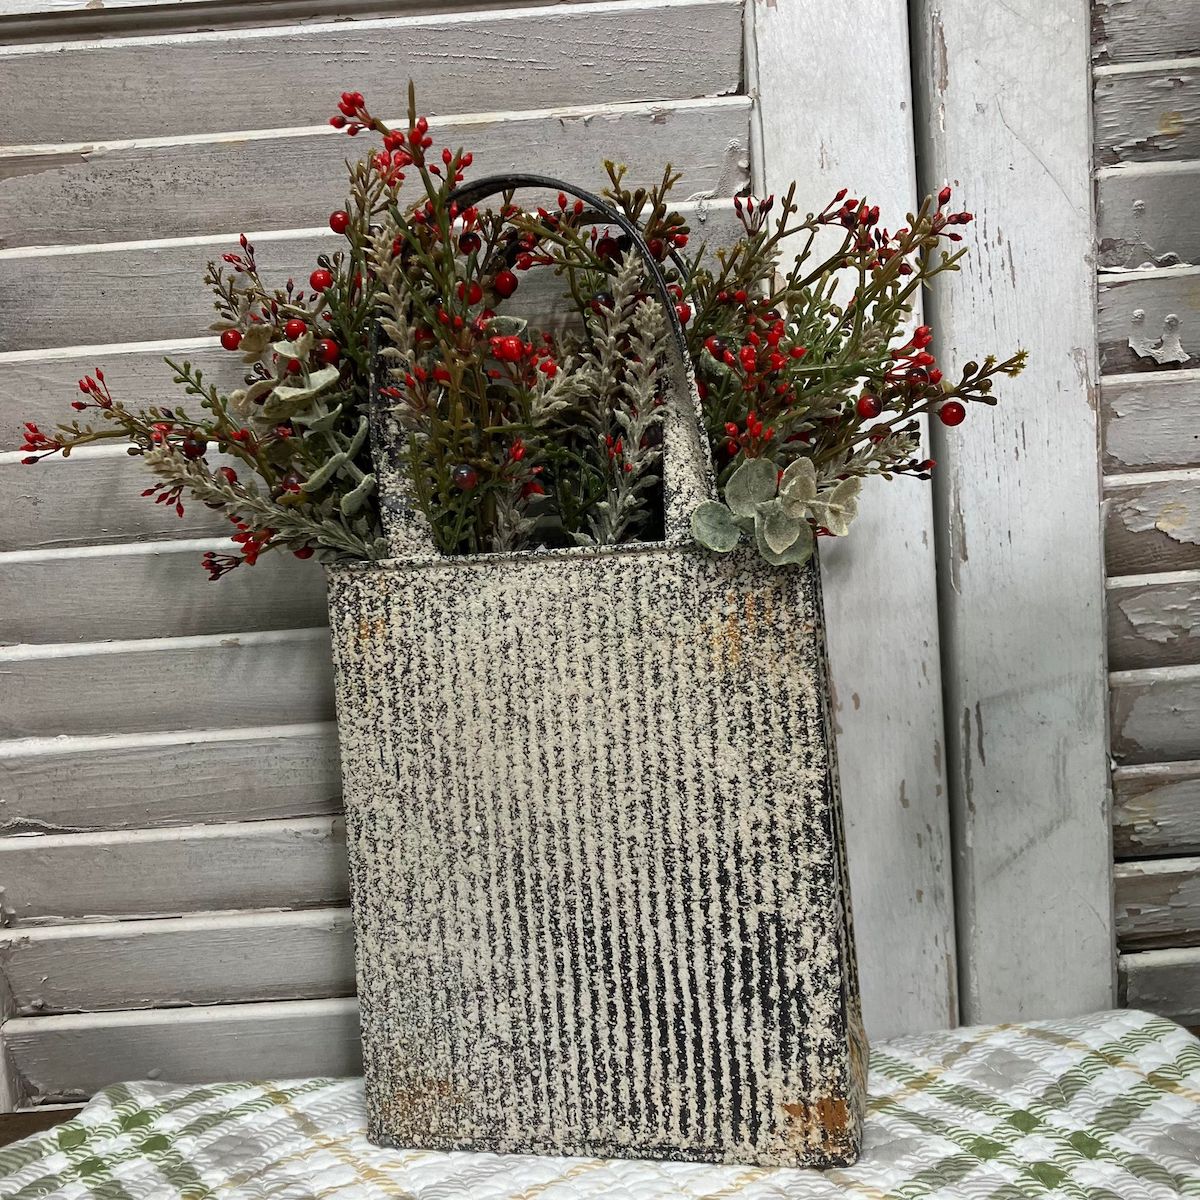 Galvanized Market Basket with Foggy Morning Eucalyptus and Berries